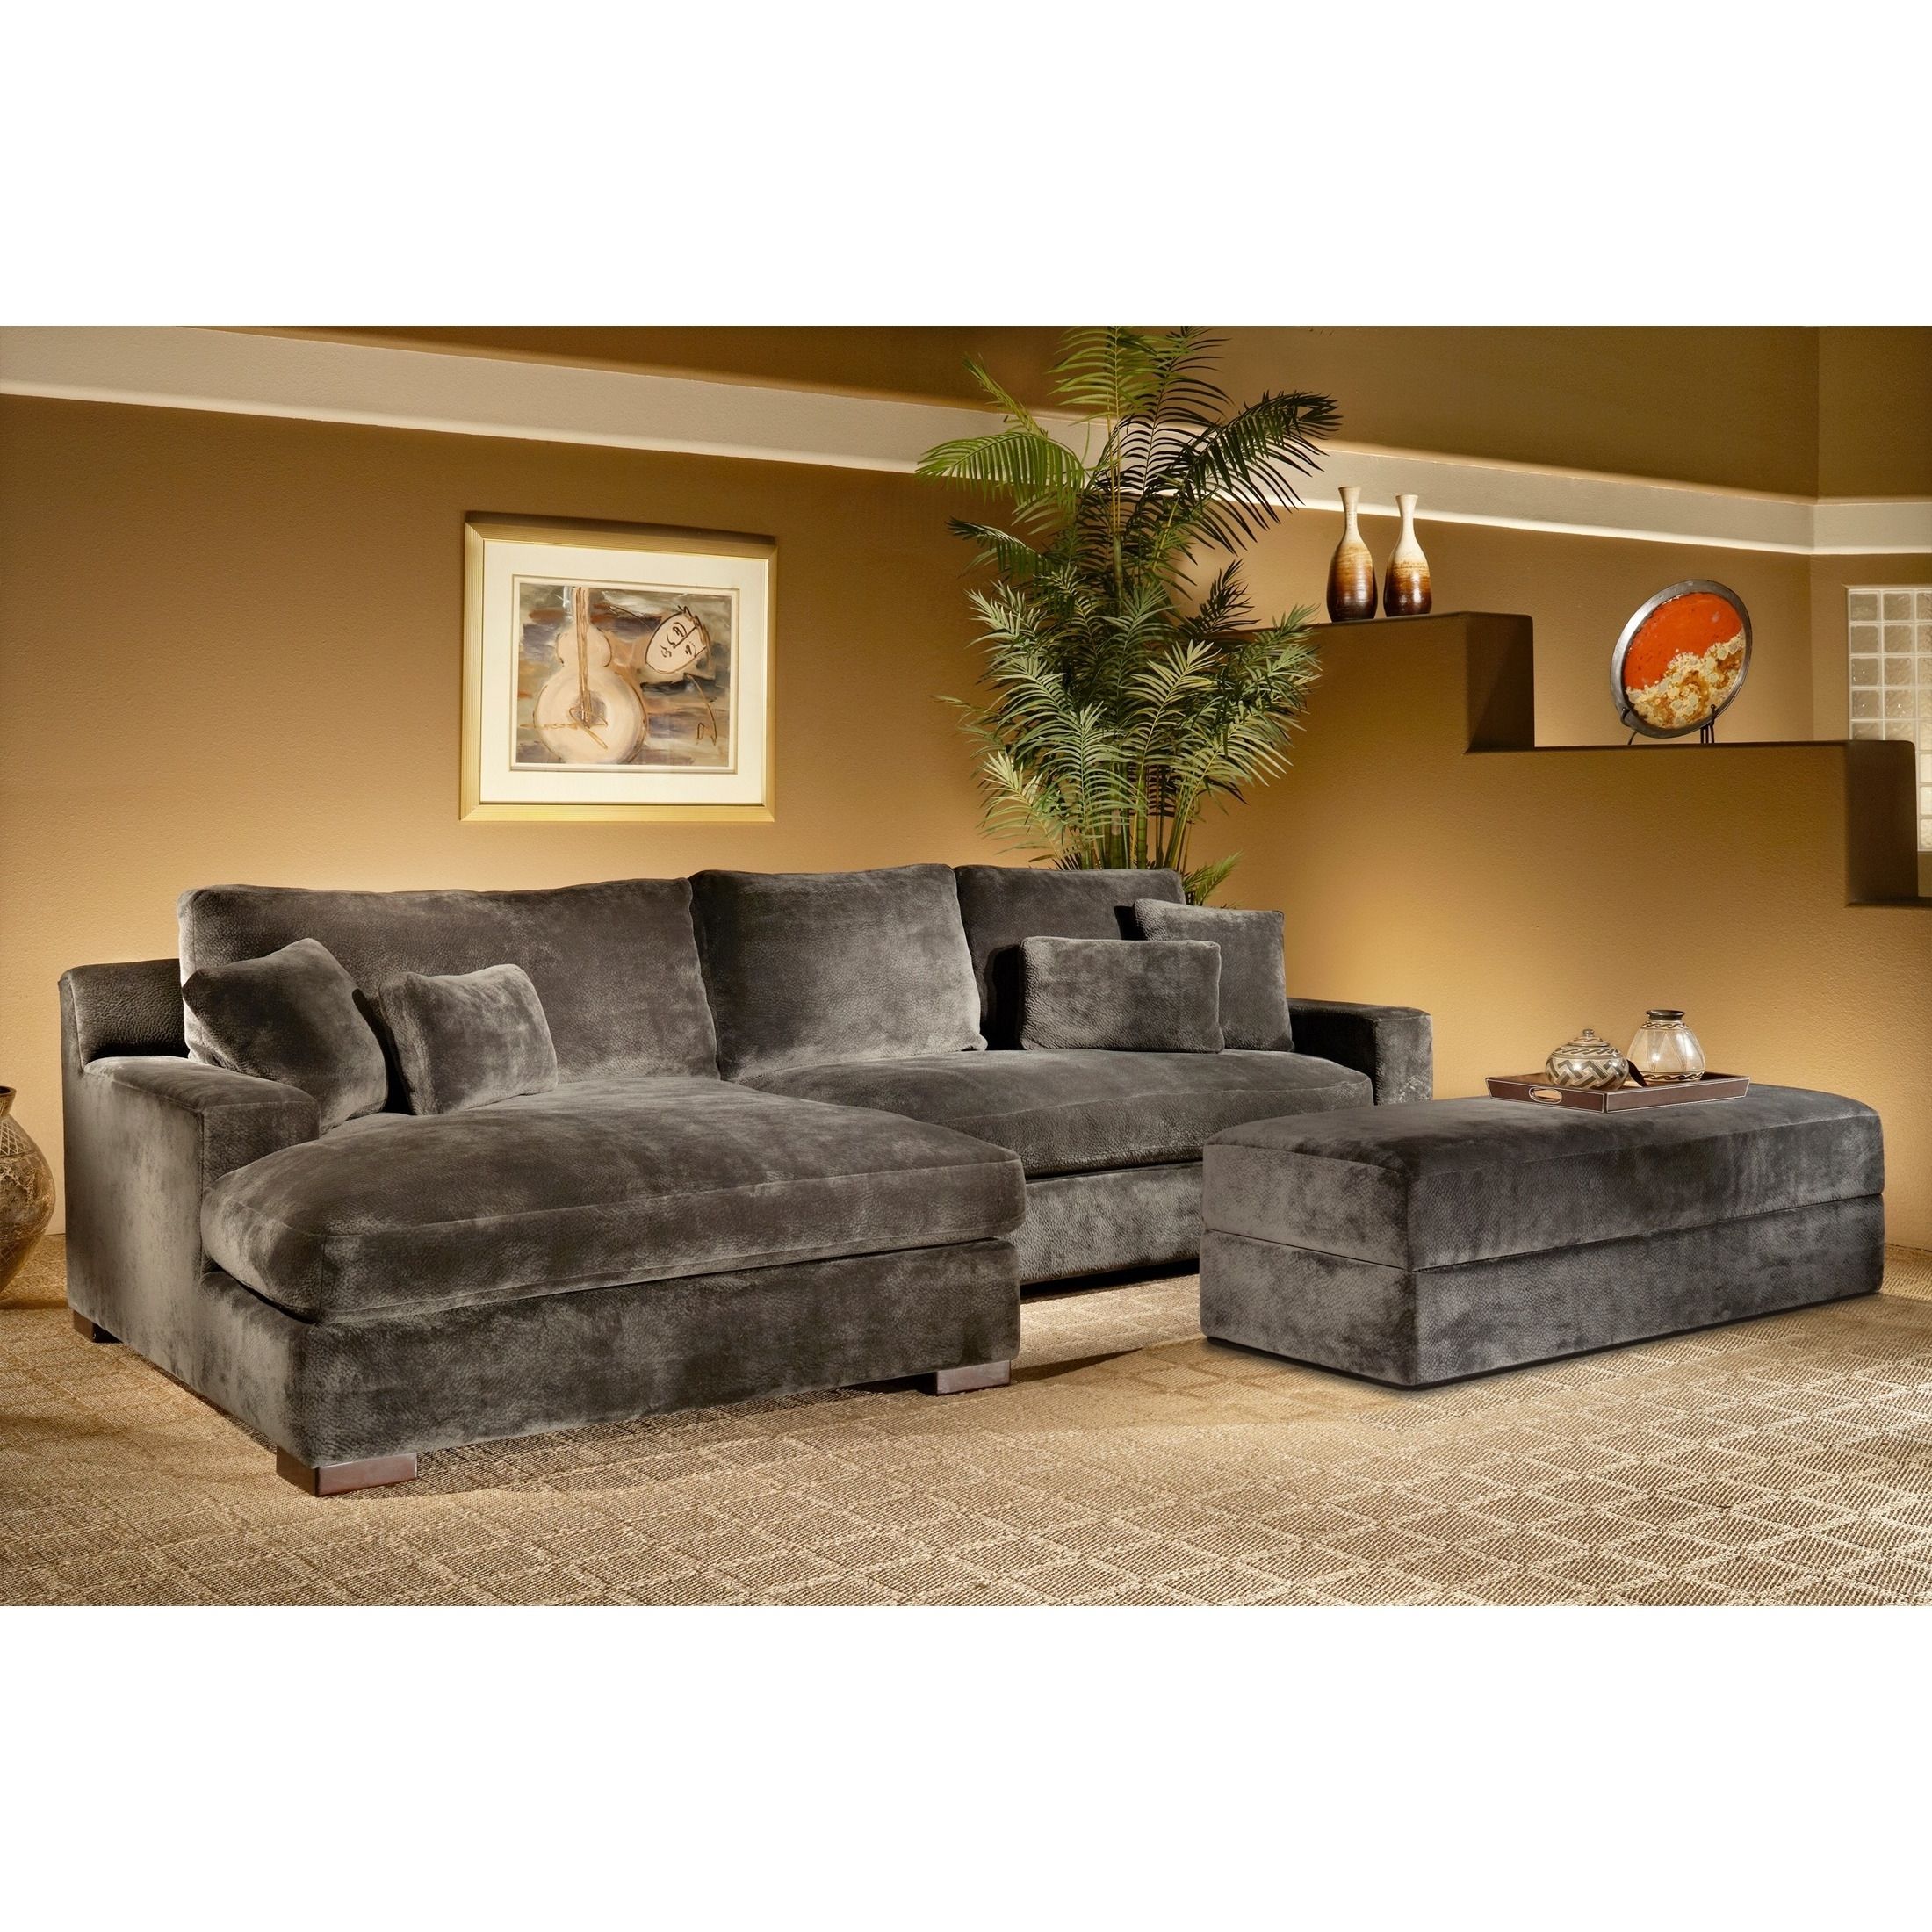 Sectional Sofas With Storage With Regard To Famous The Doris 3 Piece Smoke Sectional Sofa With Storage Ottoman Is (View 17 of 20)